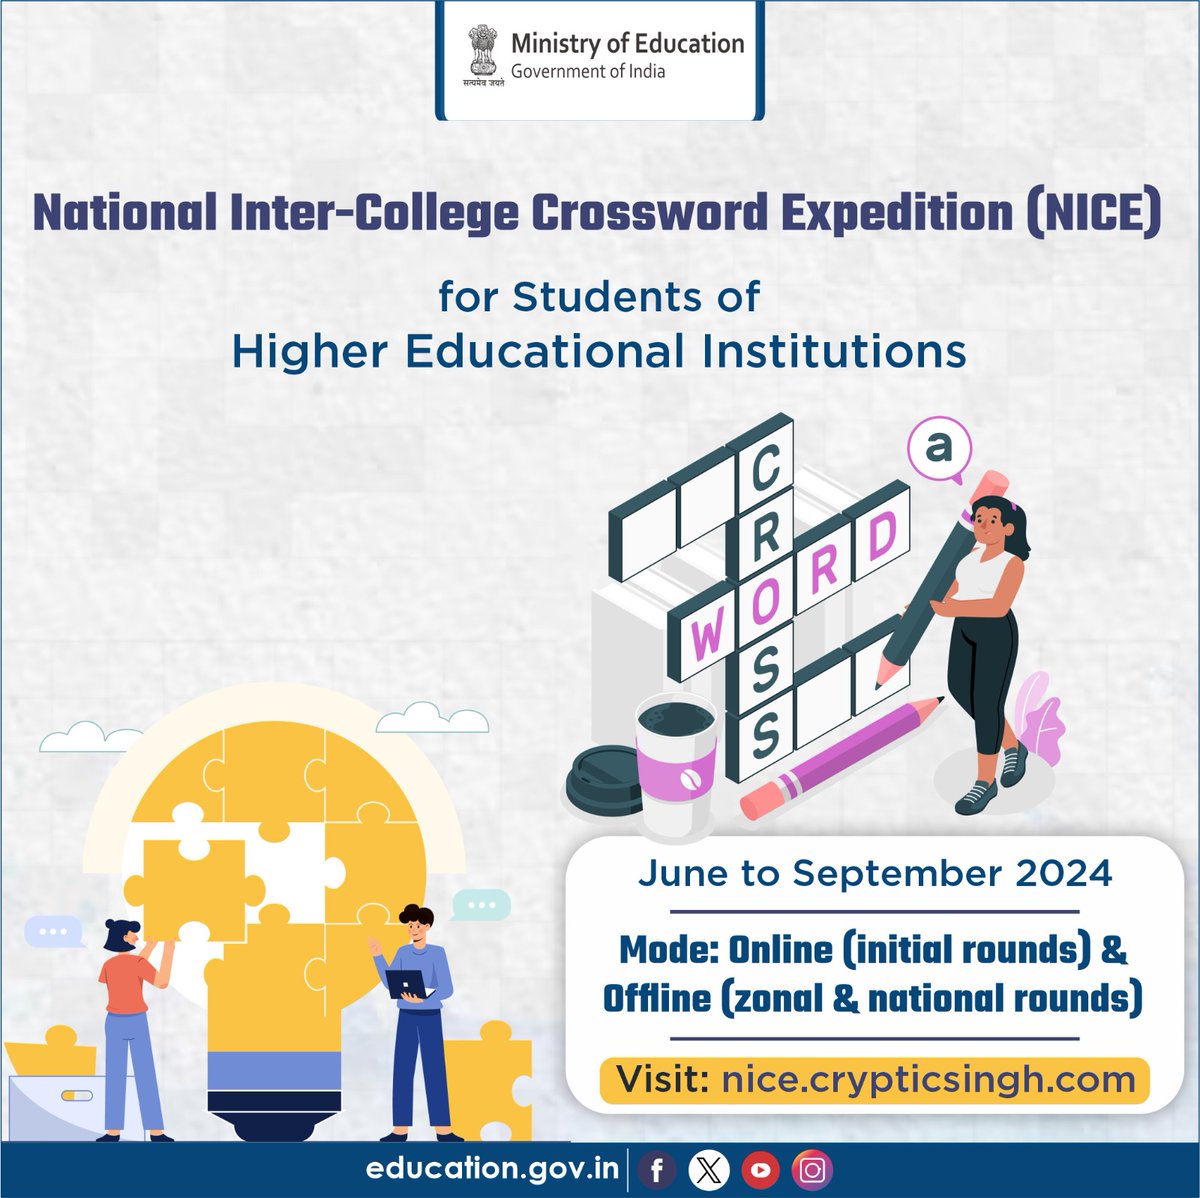 🧩 Love crosswords? National Inter-College Crossword Expedition (NICE)is back with its 3rd edition! @AICTE_INDIA , @IIMMumbai, @iitmadras, and Extra-C are teaming up to bring you an epic crossword challenge from June to September 2024. Registration are open! For more